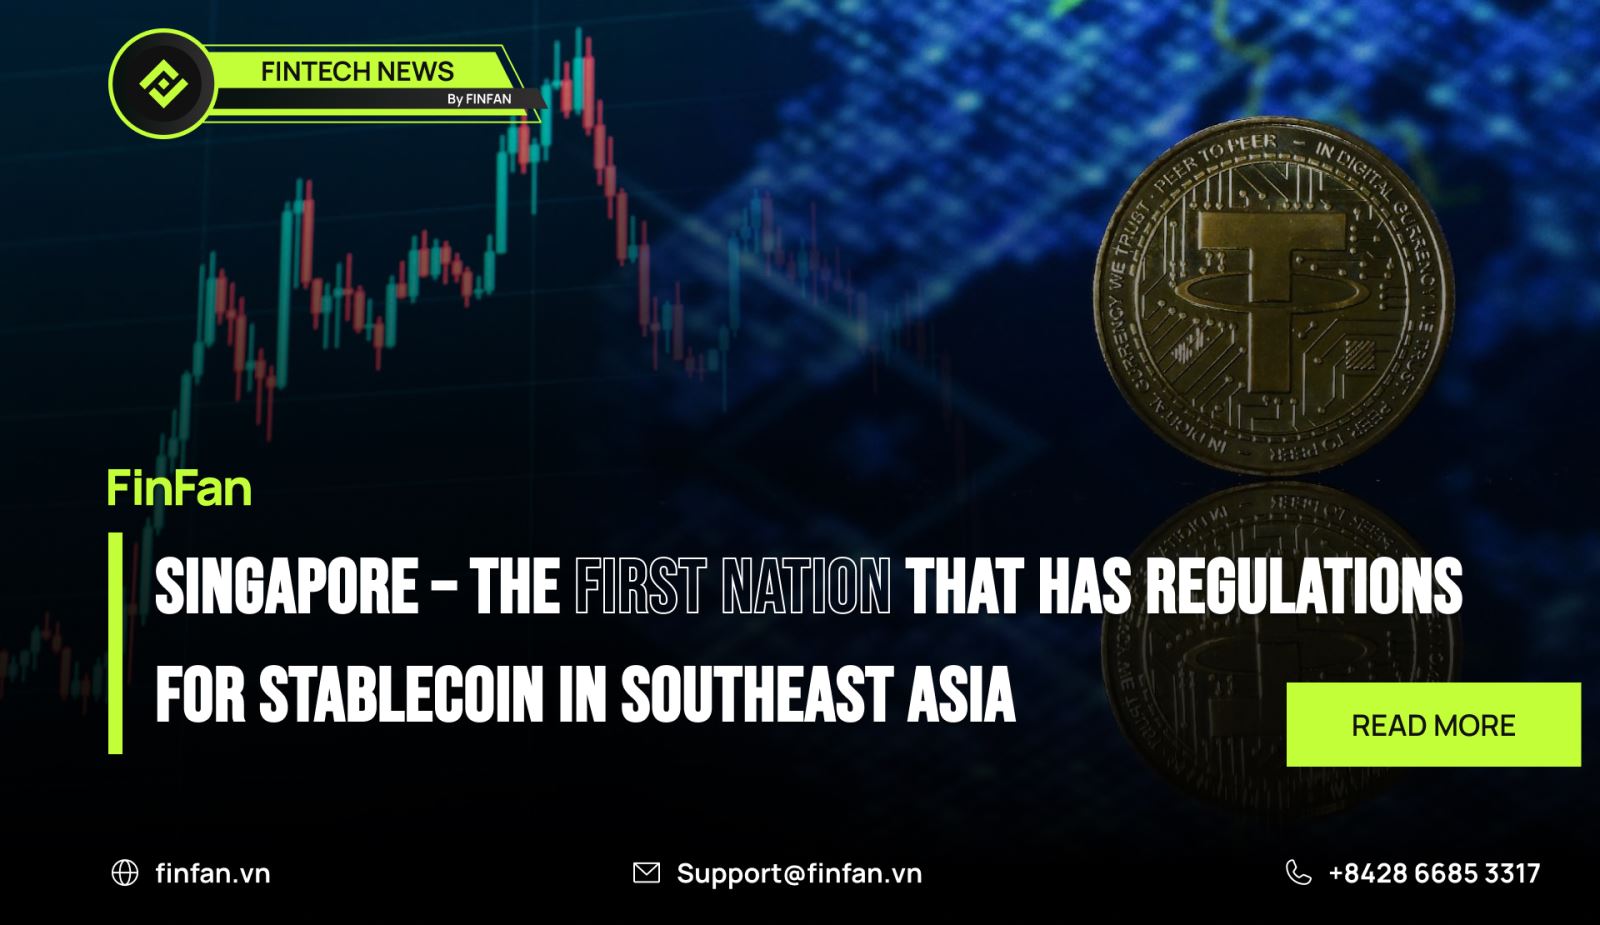 Singapore – the first nation that has regulations for stablecoin in Southeast Asia